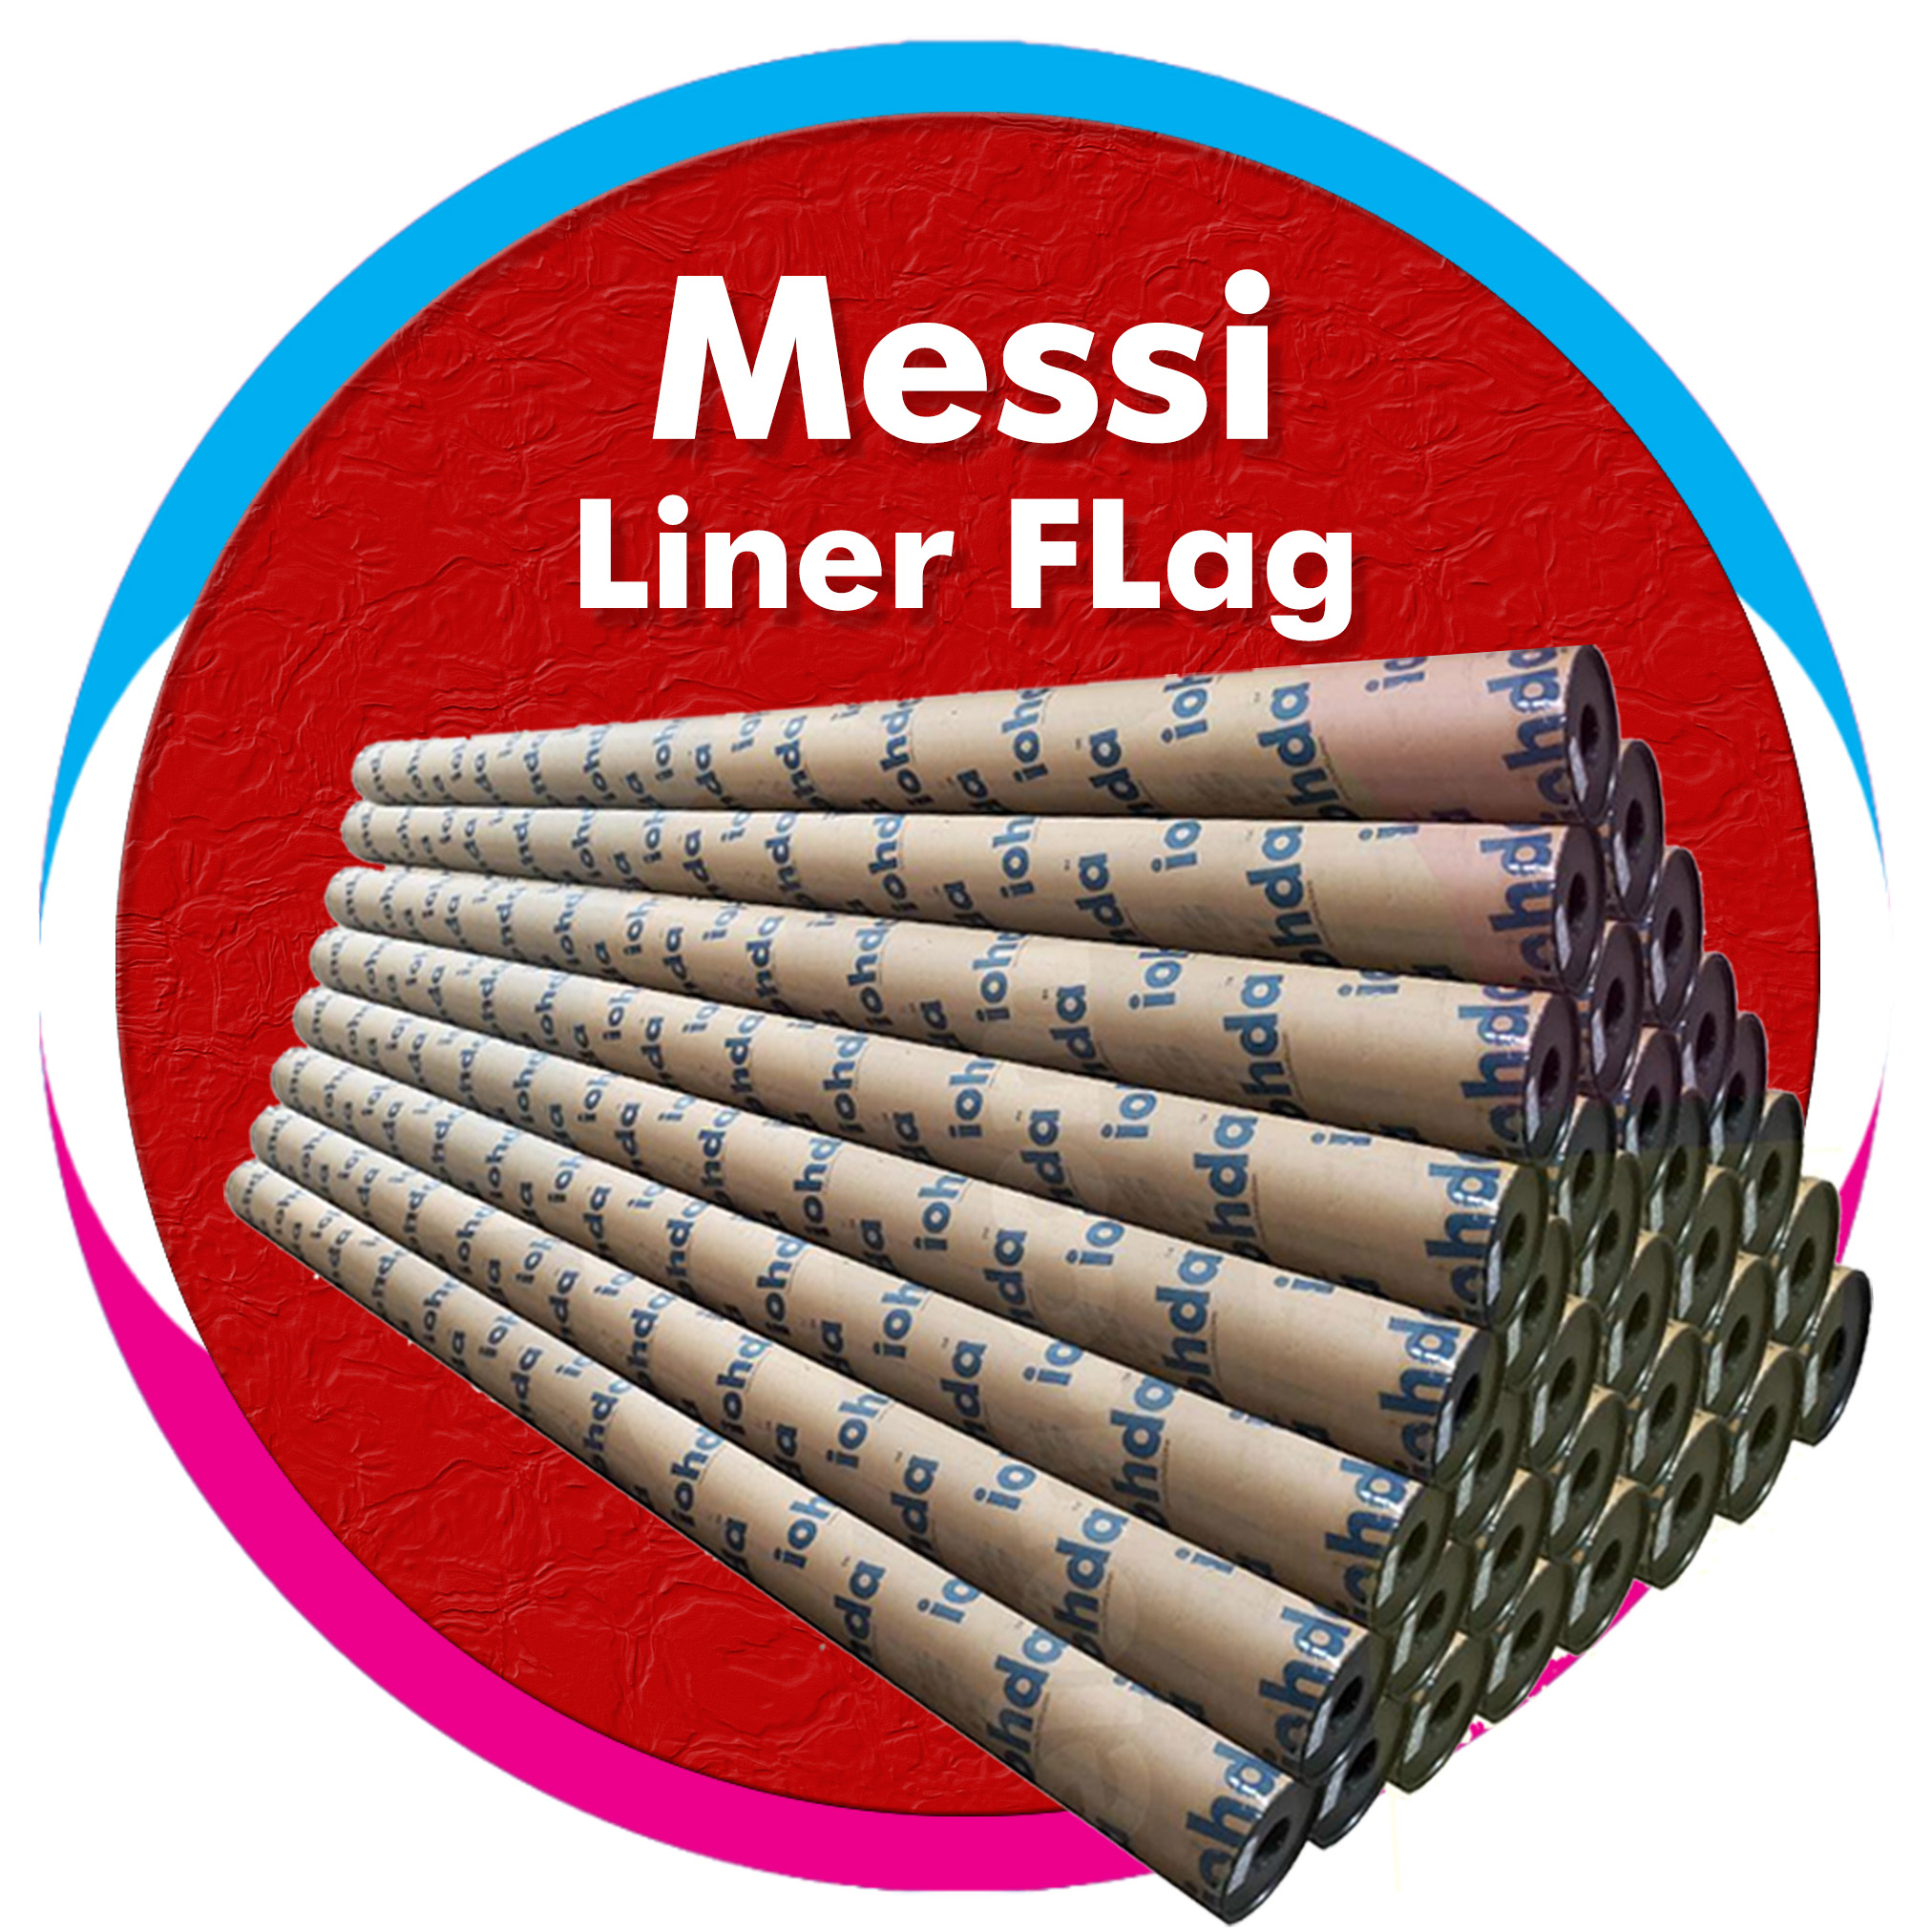 iohda Messi Liner Flag 60 in x 150 ft